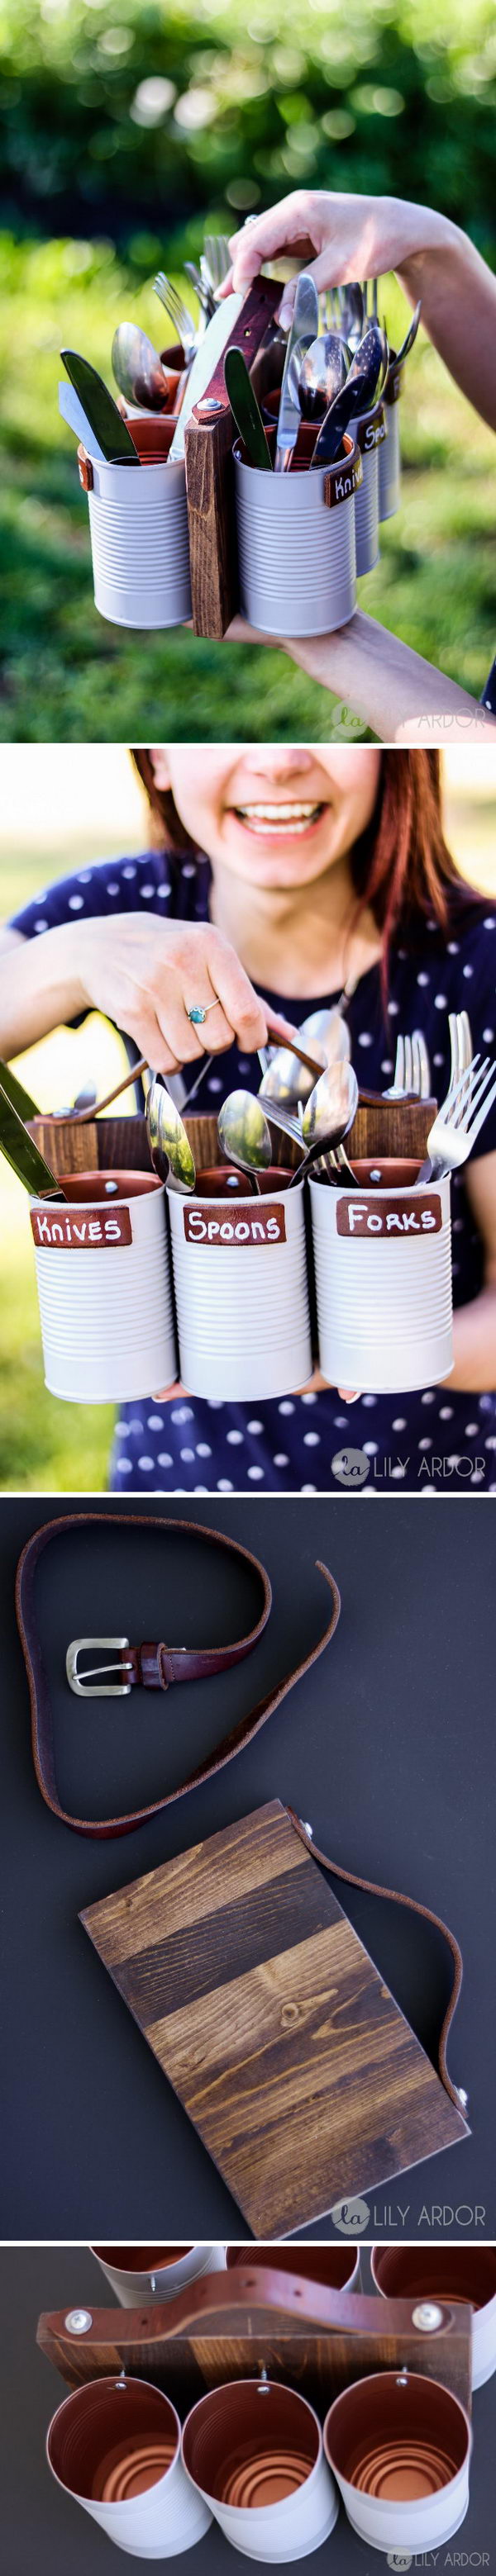 DIY Silverware Caddy Using Painted Cans. 